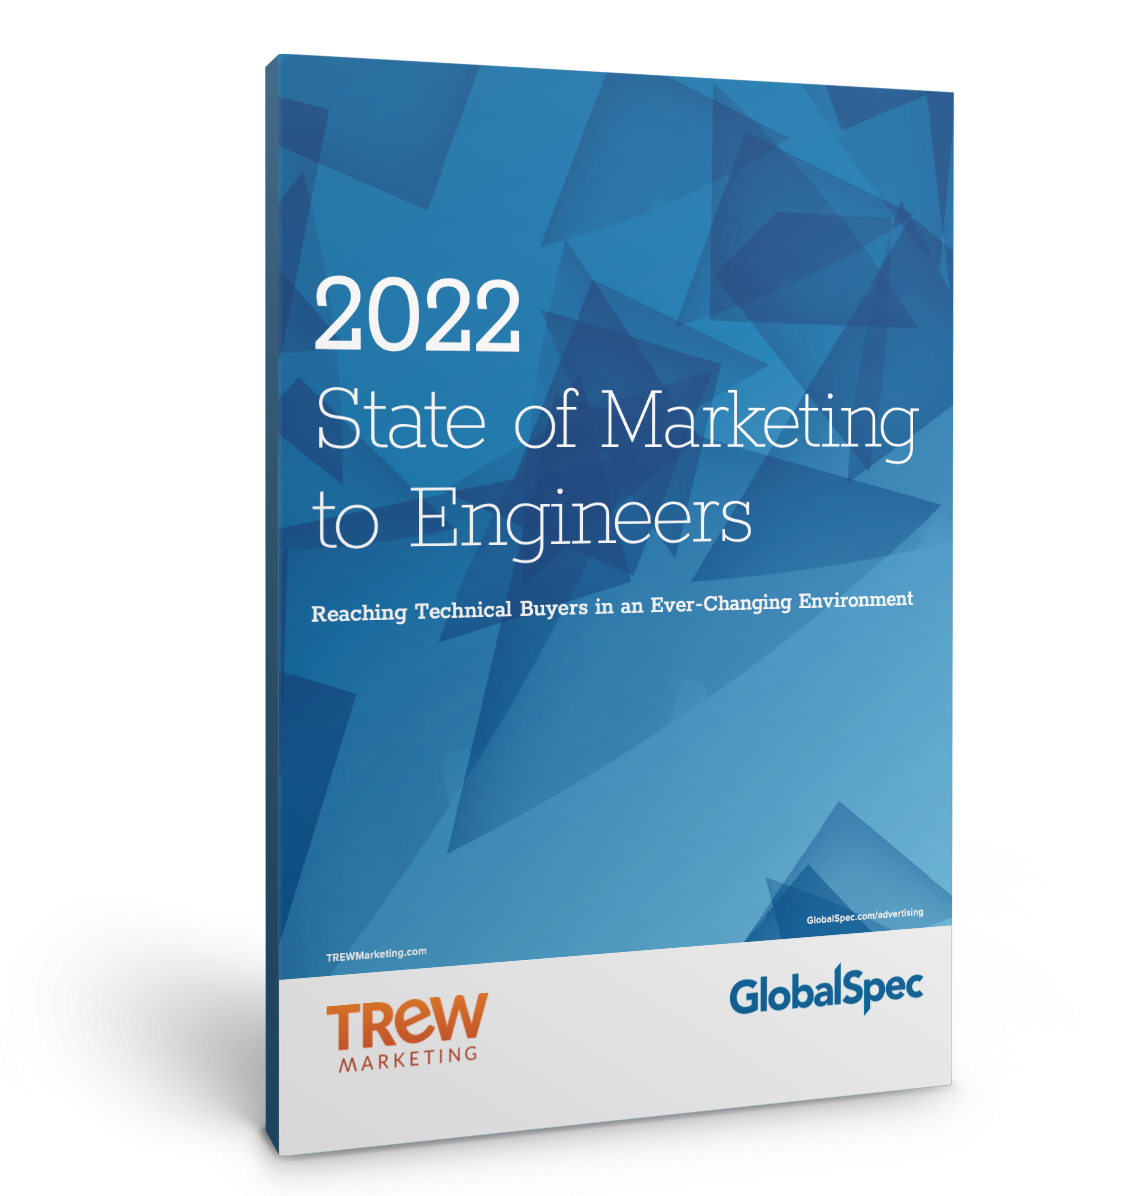 Mockup Cropped - State of Marketing to Engineers (1)